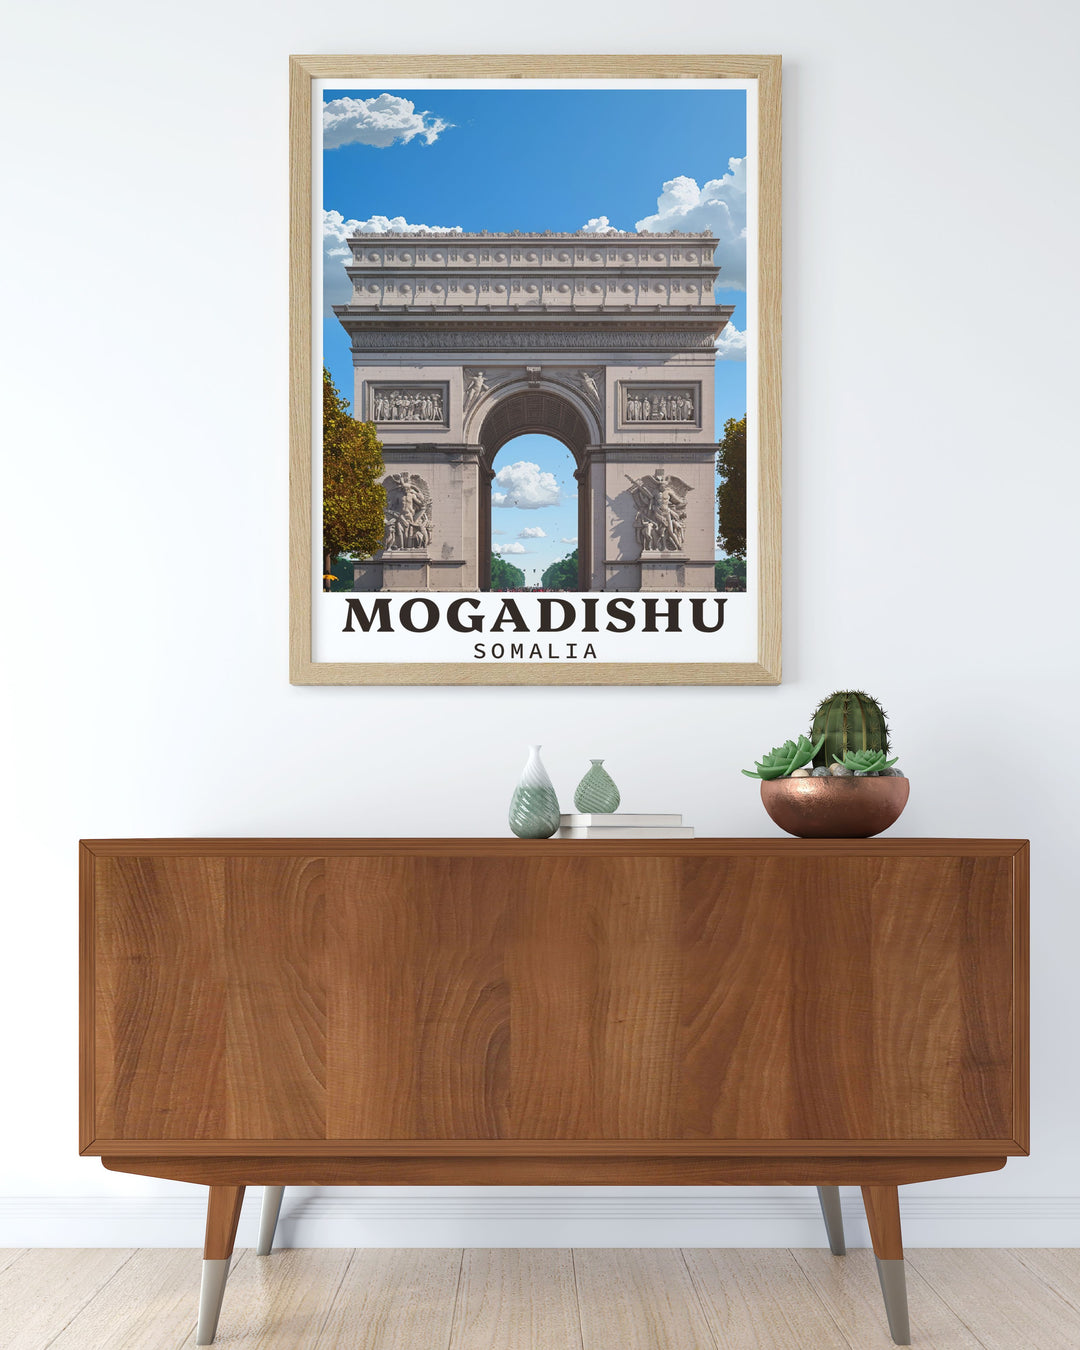 Featuring the majestic Arch of Triumph, this poster celebrates the unique blend of history and culture in Mogadishu, inviting viewers to explore the citys iconic sites and vibrant atmosphere.